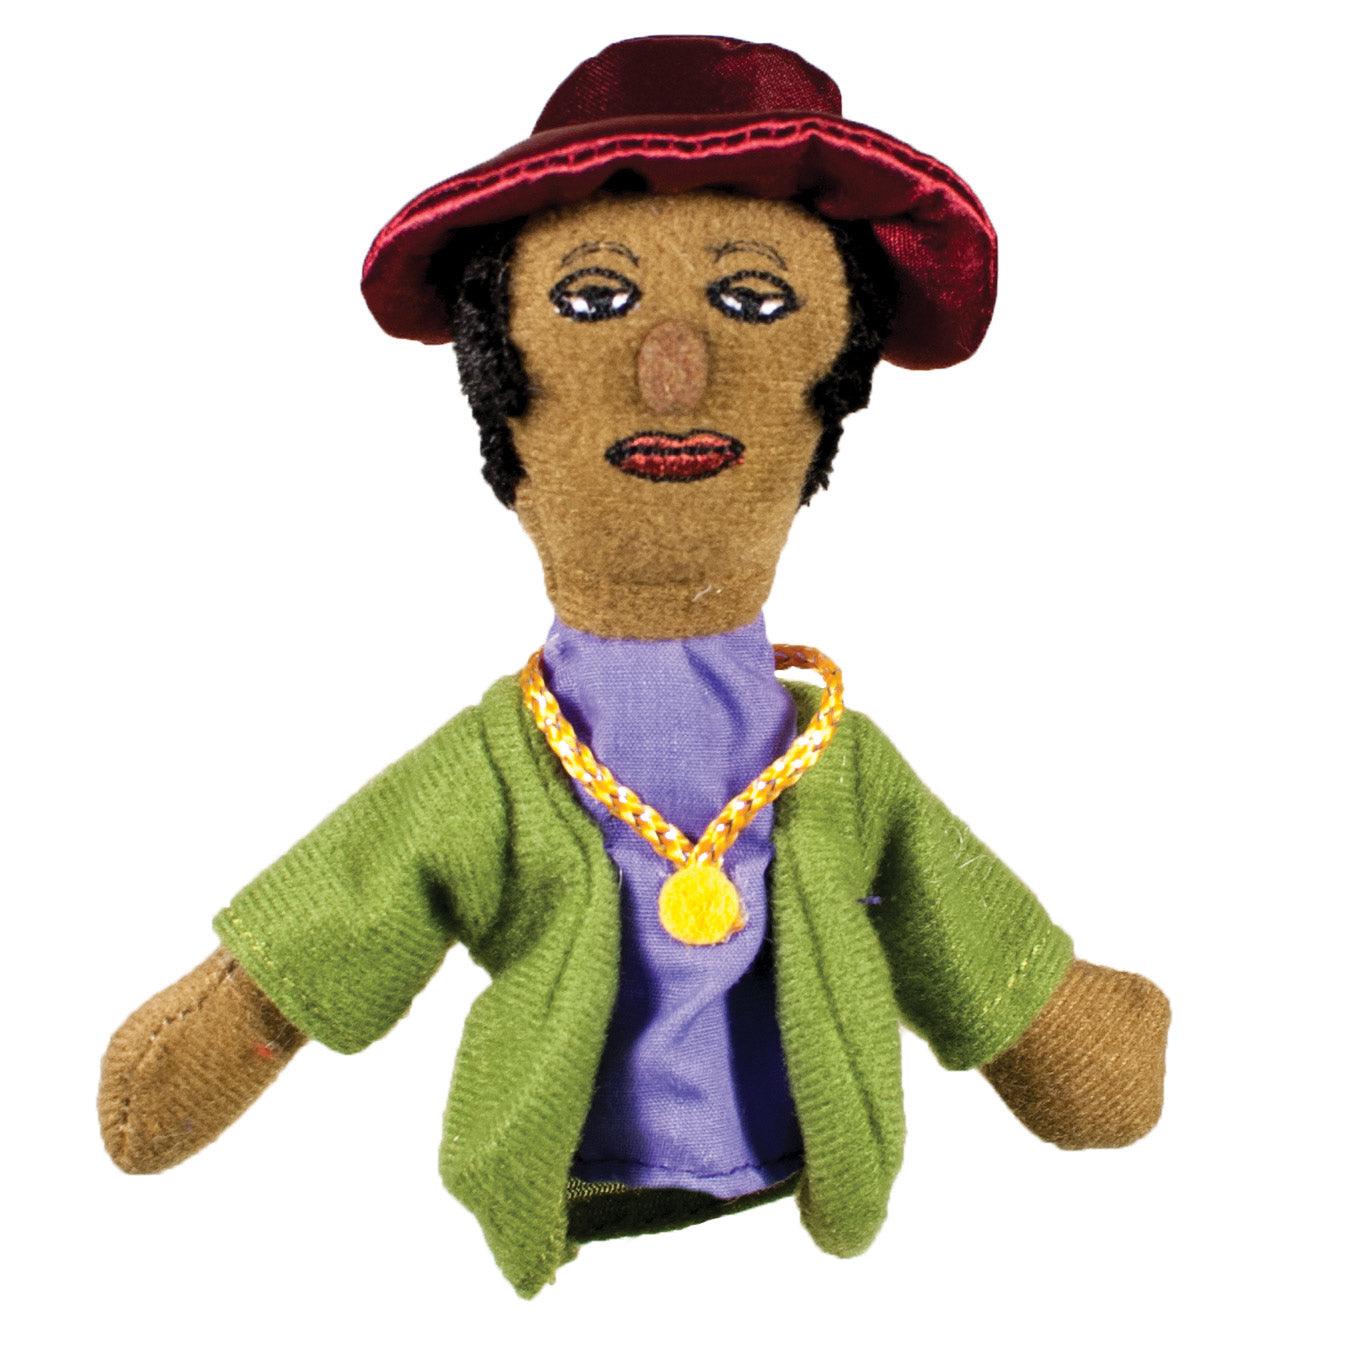 Product photo of Zora Neale Hurston Finger Puppet, a novelty gift manufactured by The Unemployed Philosophers Guild.